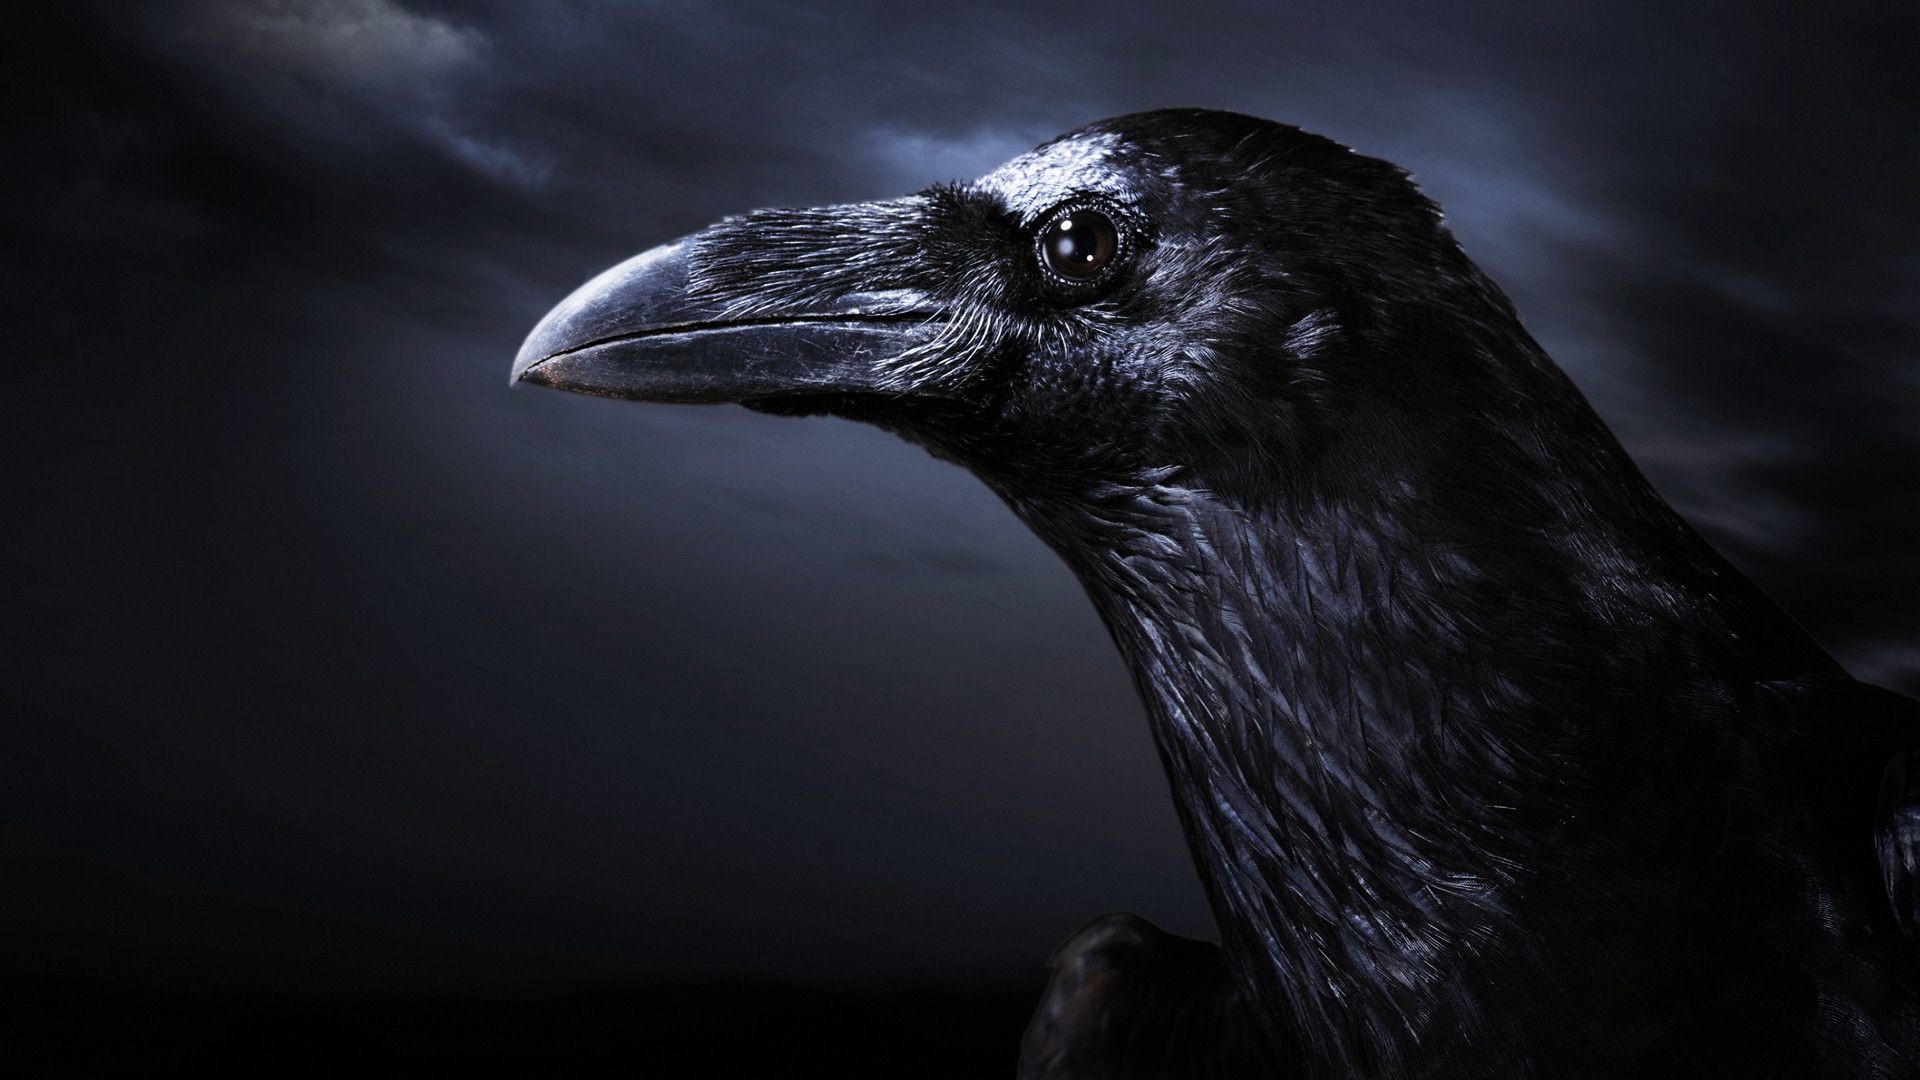 1920x1080 crow wallpapers and backgrounds | Crow Black Background Wallpaper,Images ,Pictures,Photos,HD Wallpapers | Pinterest | Black background wallpaper,  Crows and ...